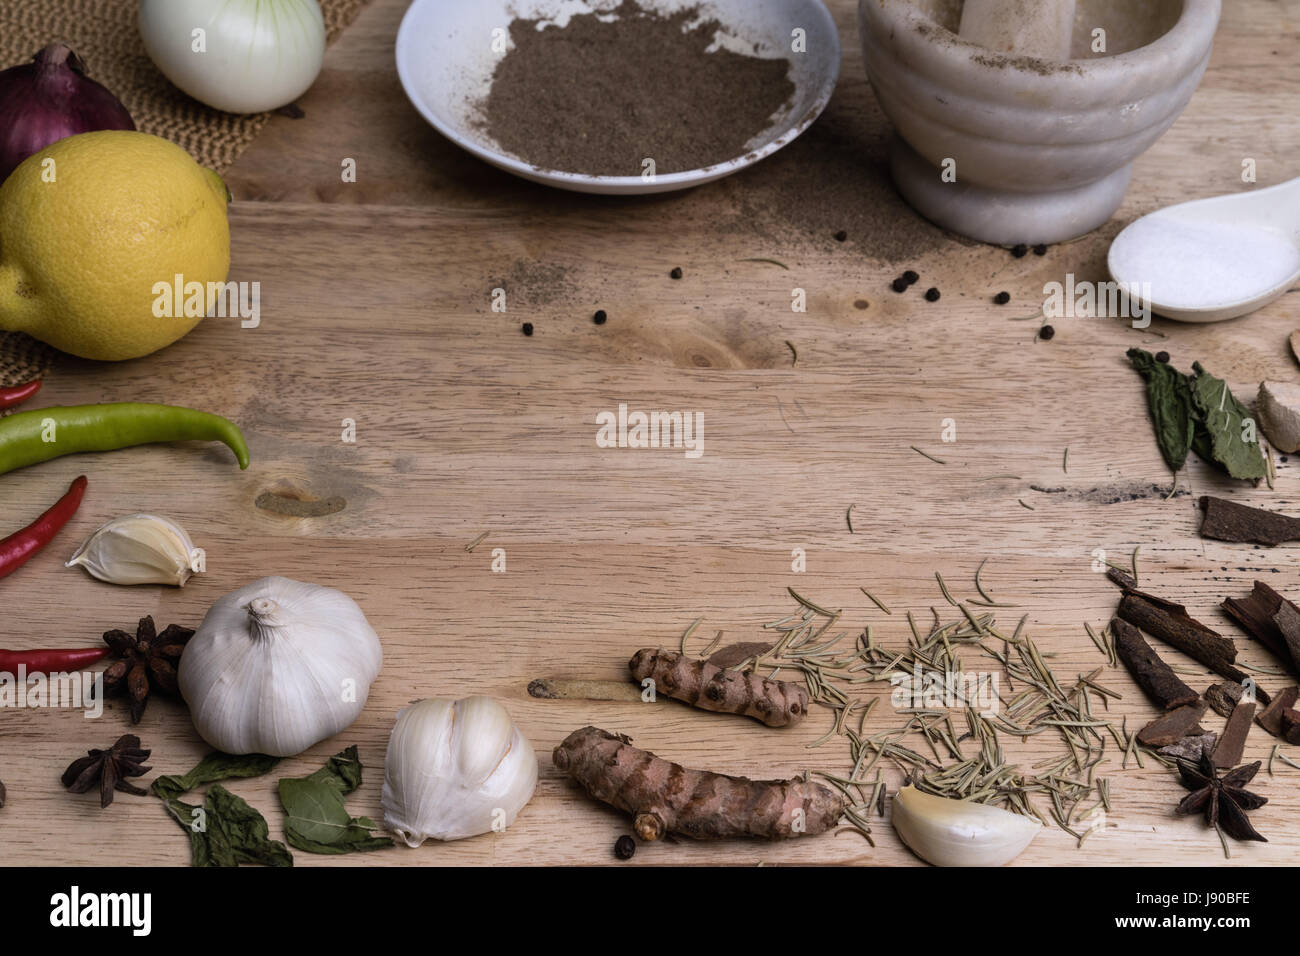 Asian spices collection for cooking Stock Photo